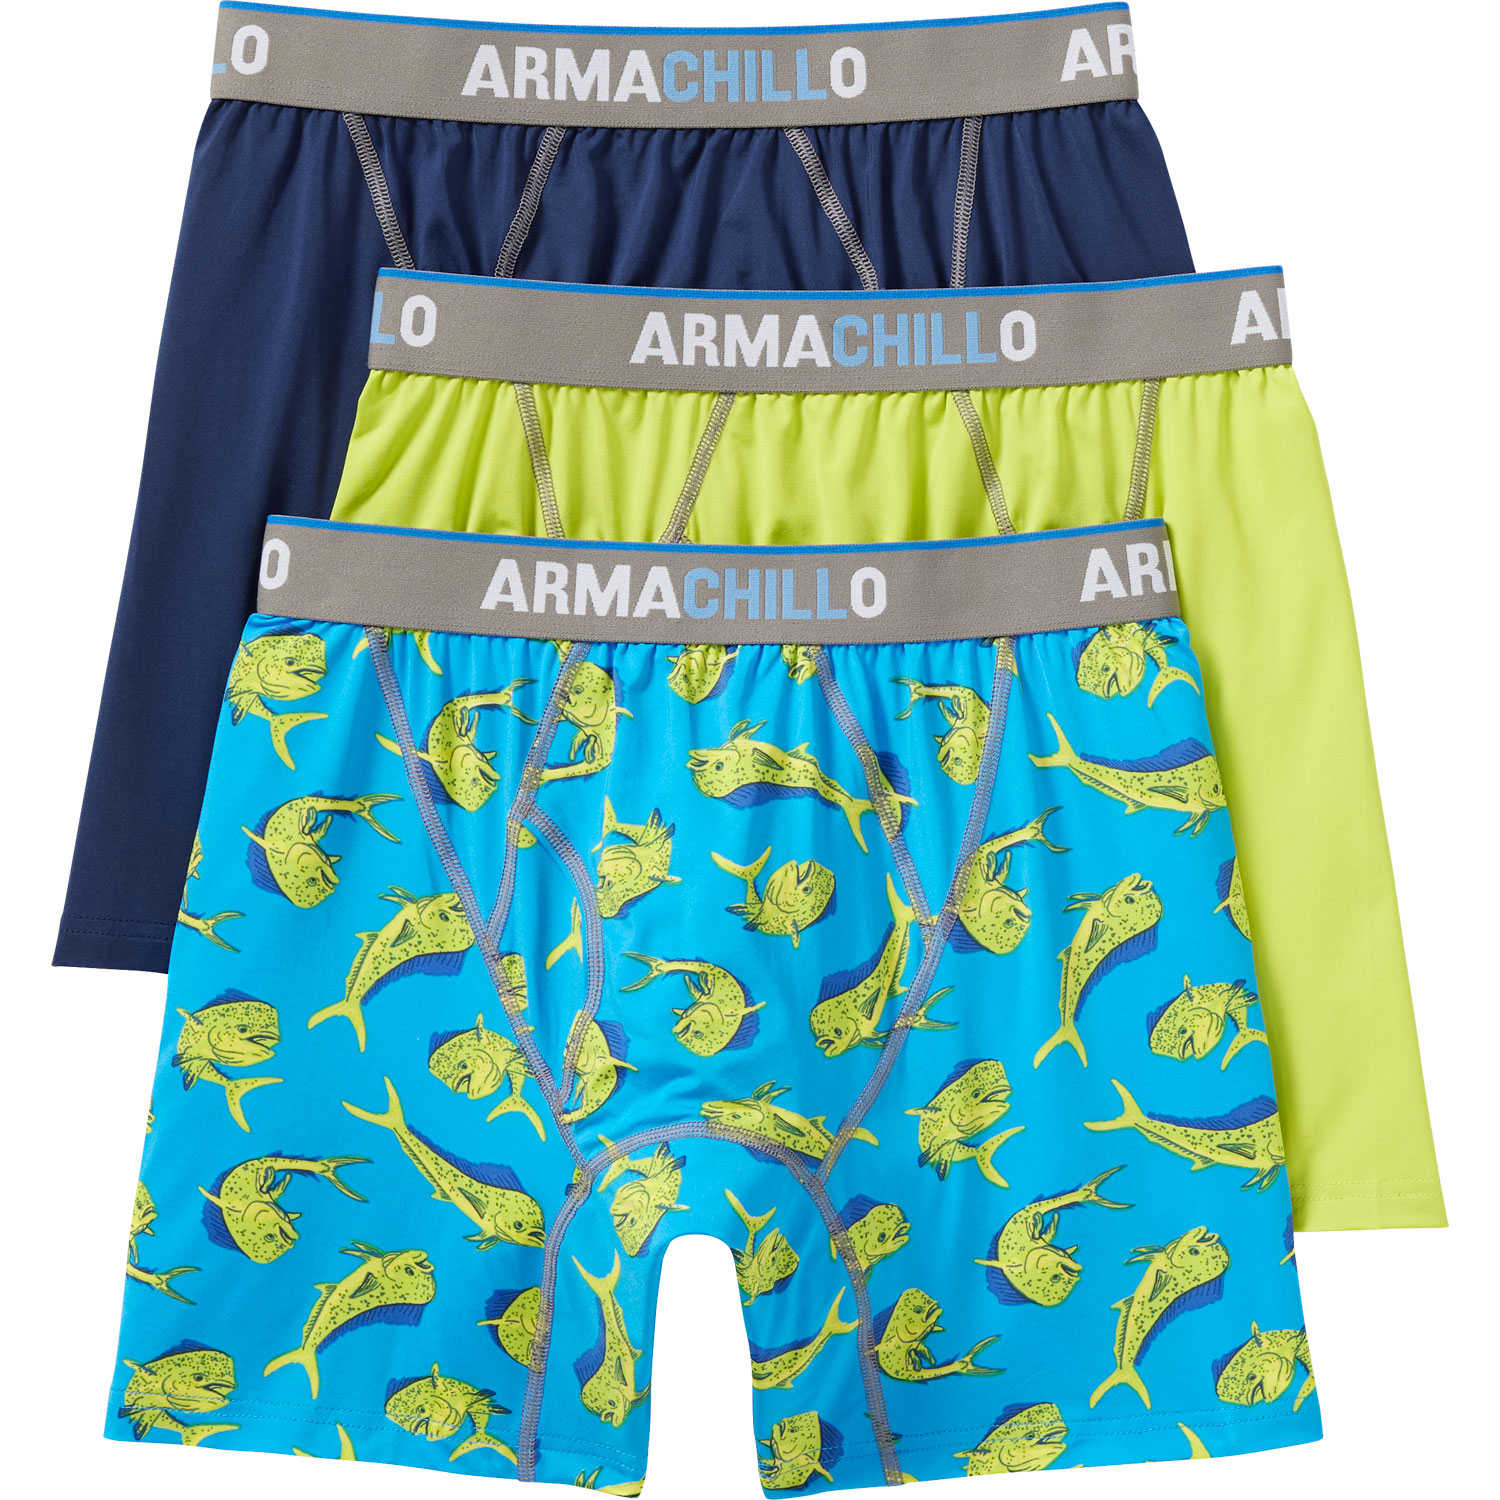 Duluth Trading Armachillo Boxer Brief Mens Size XL (40-42) Jelly Fish  Pattern